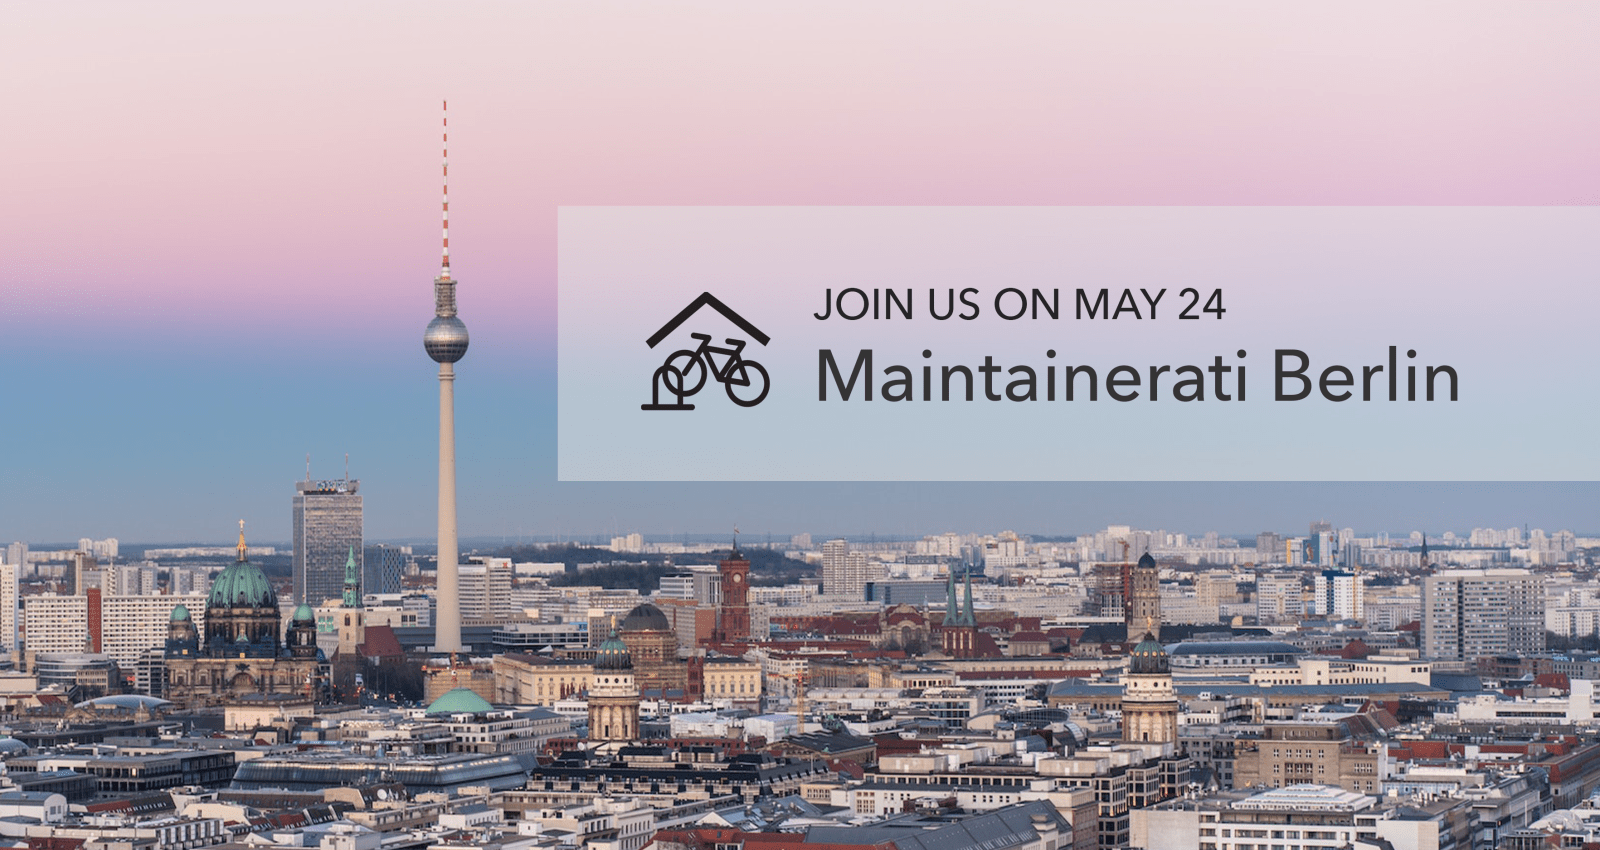 Join us at Maintainerati Berlin